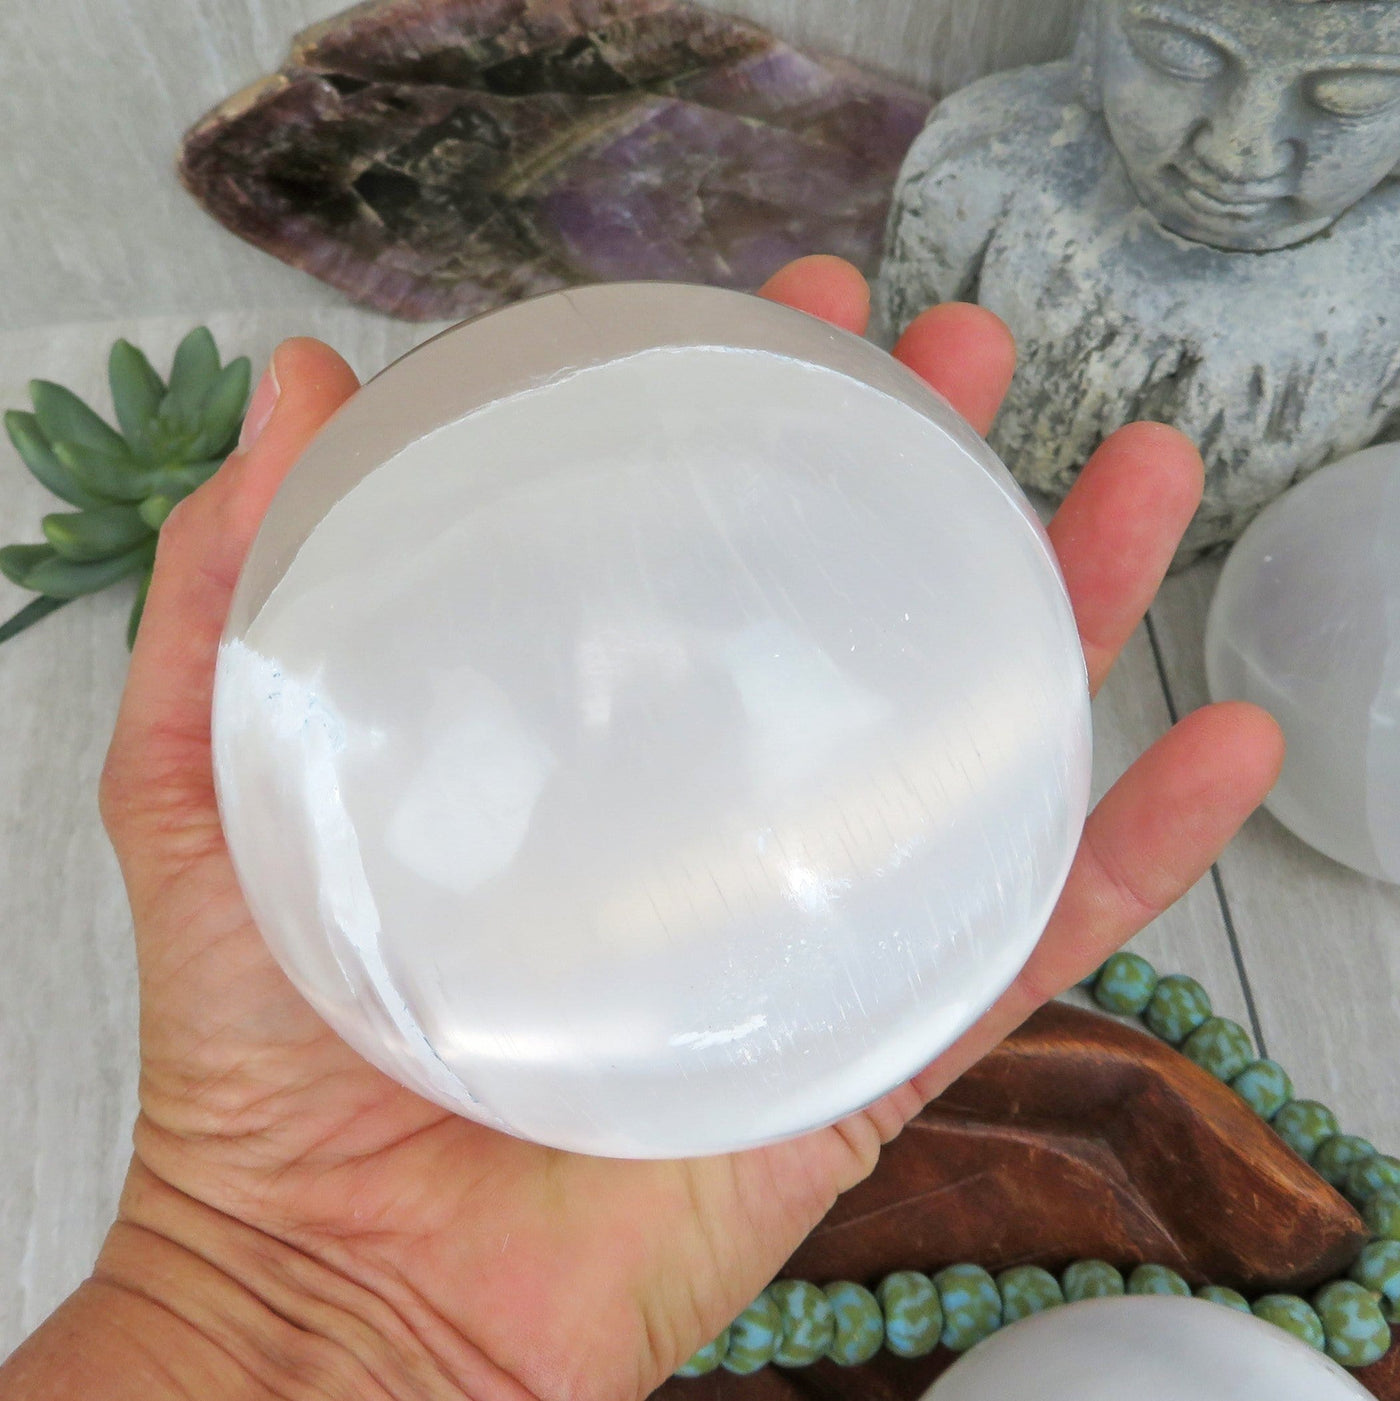 selenite sphere in hand for size reference